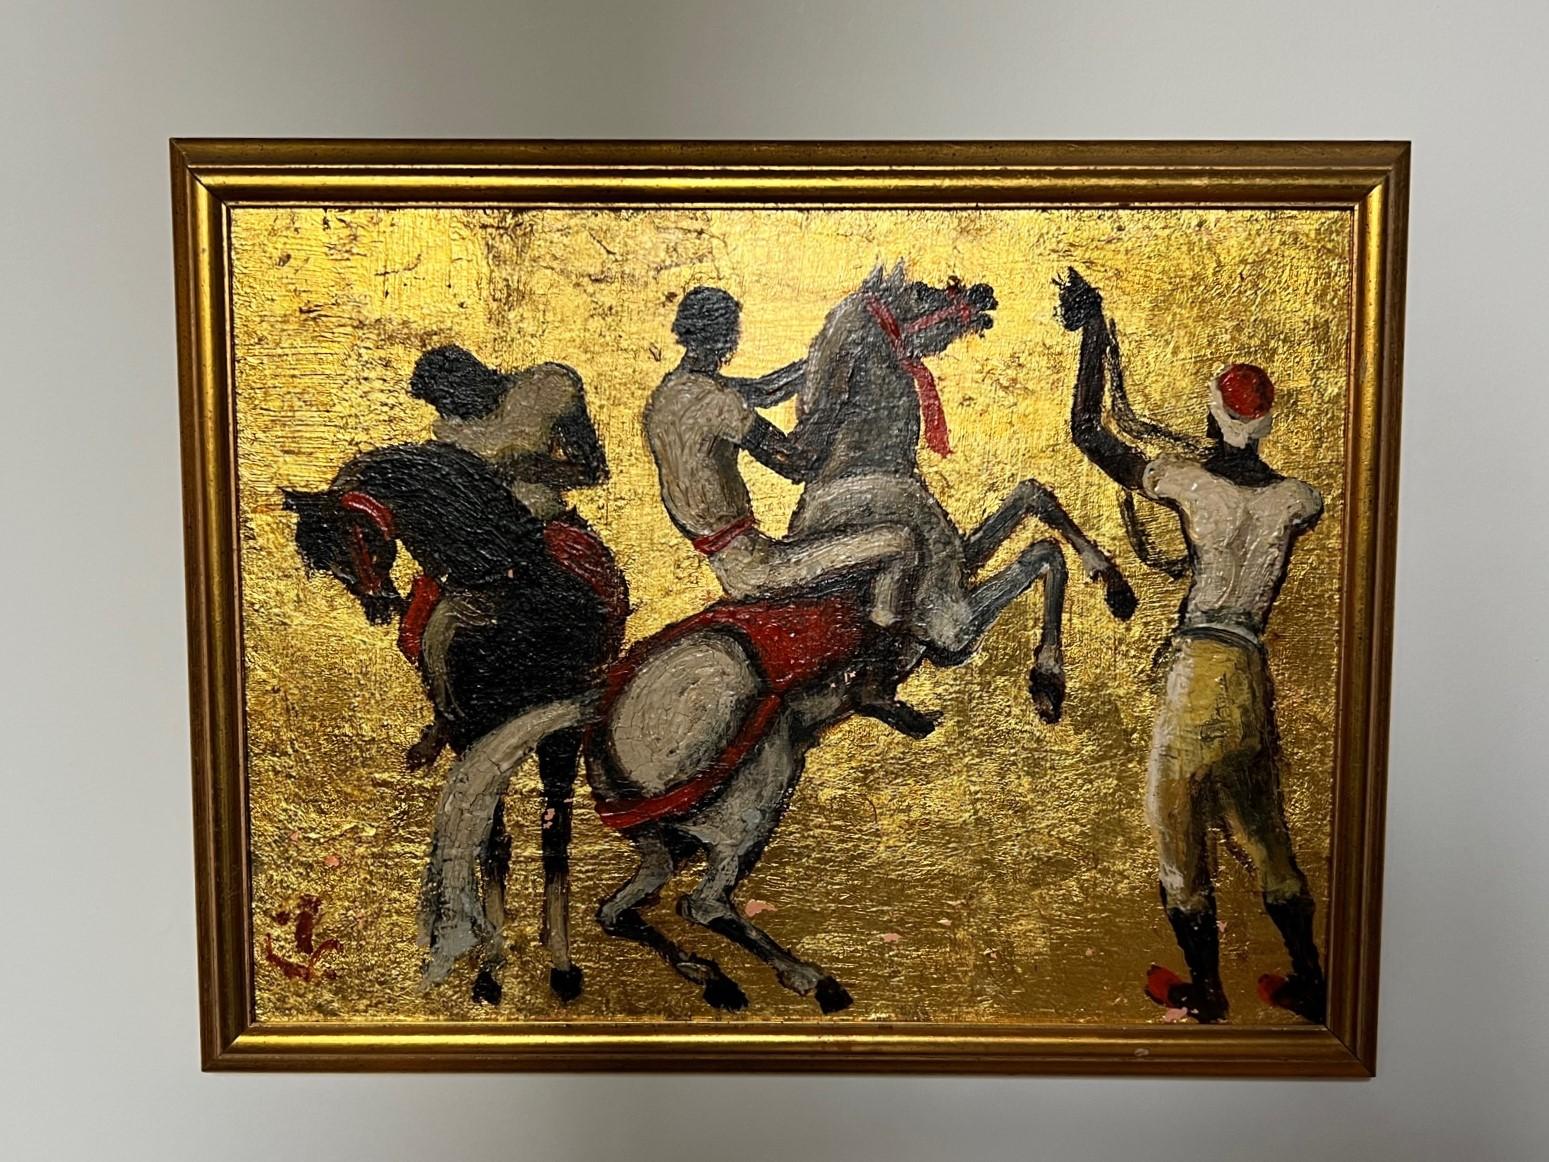 Painted 1950s Art Deco Style Figurative Painting with Horses by Porter Woodruff, Framed For Sale